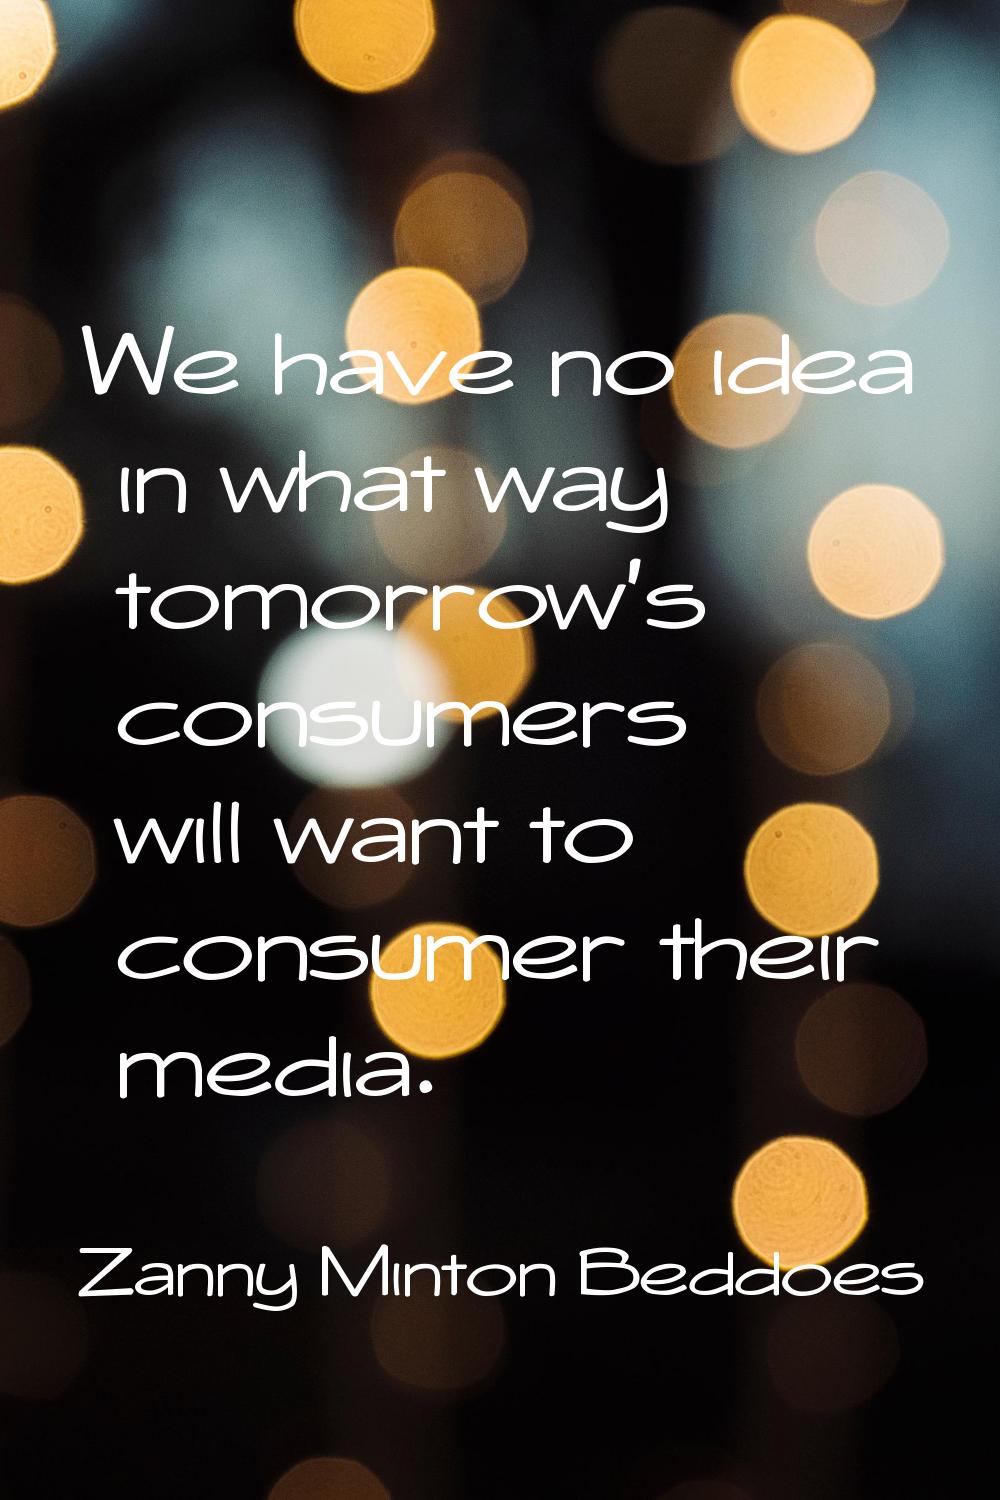 We have no idea in what way tomorrow's consumers will want to consumer their media.